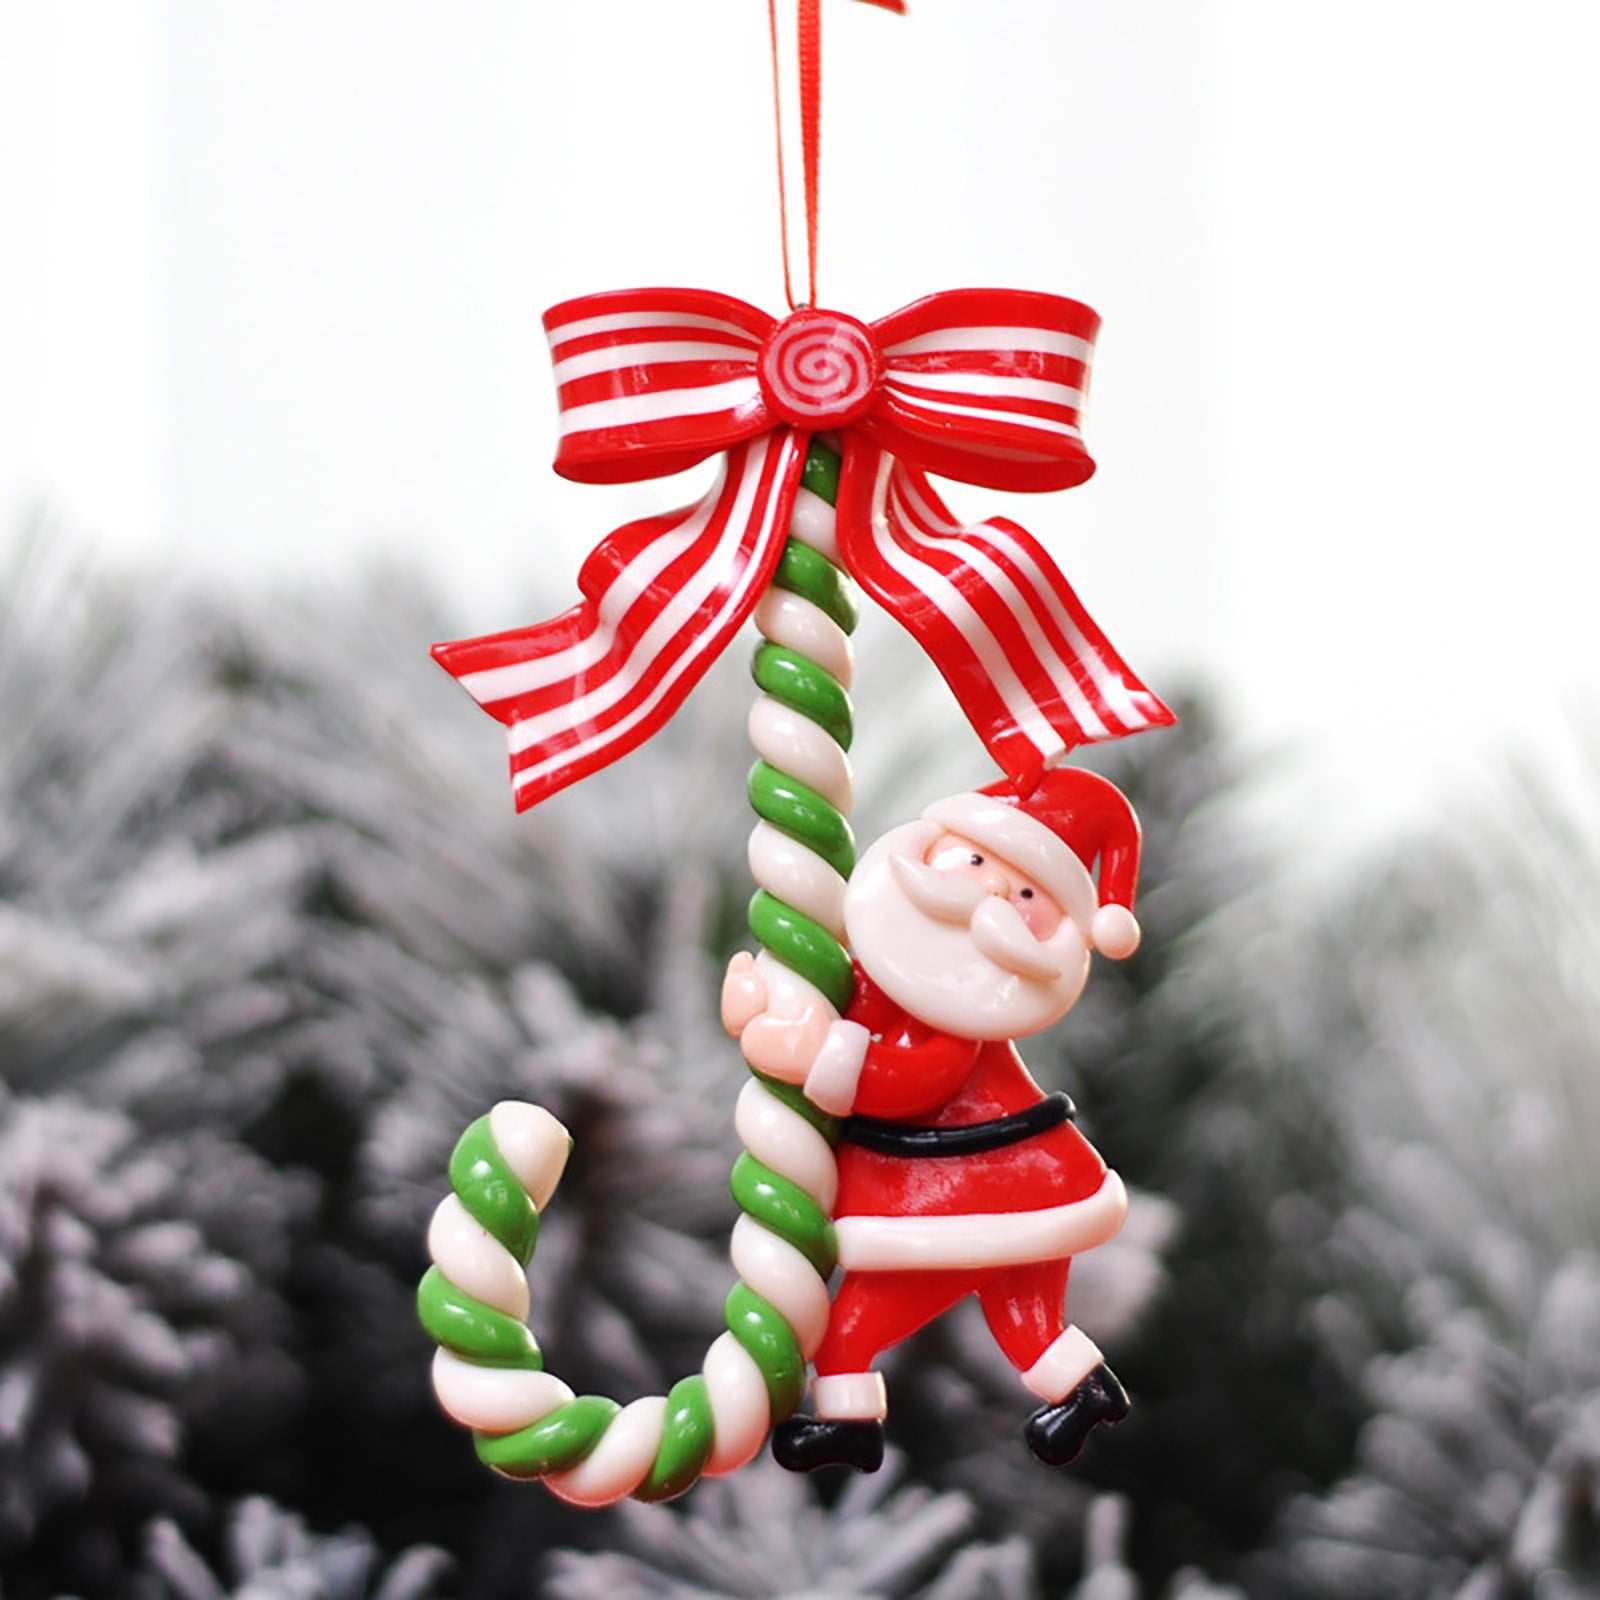 Christmas Ornaments Candy Christmas Ornaments Candy Cane Decorations Ceramic Candy Cane Ornaments Food Ornament Candy Cane Ornaments